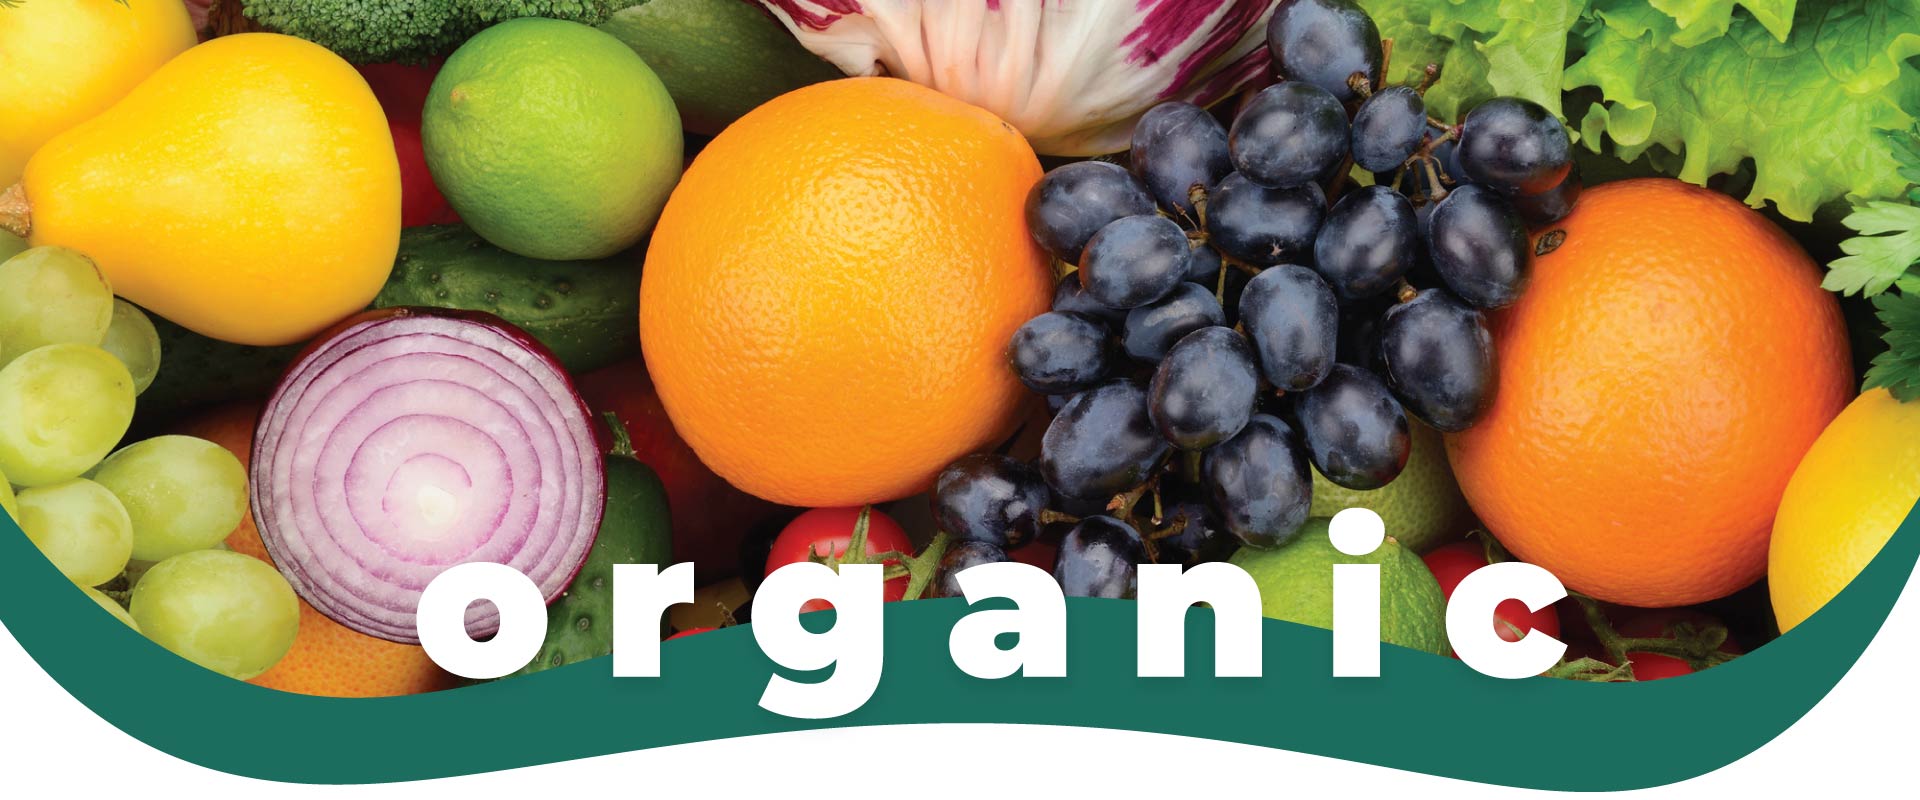 <a href="https://valleypackinginc.com/organic">Organic</a> produce in california united states